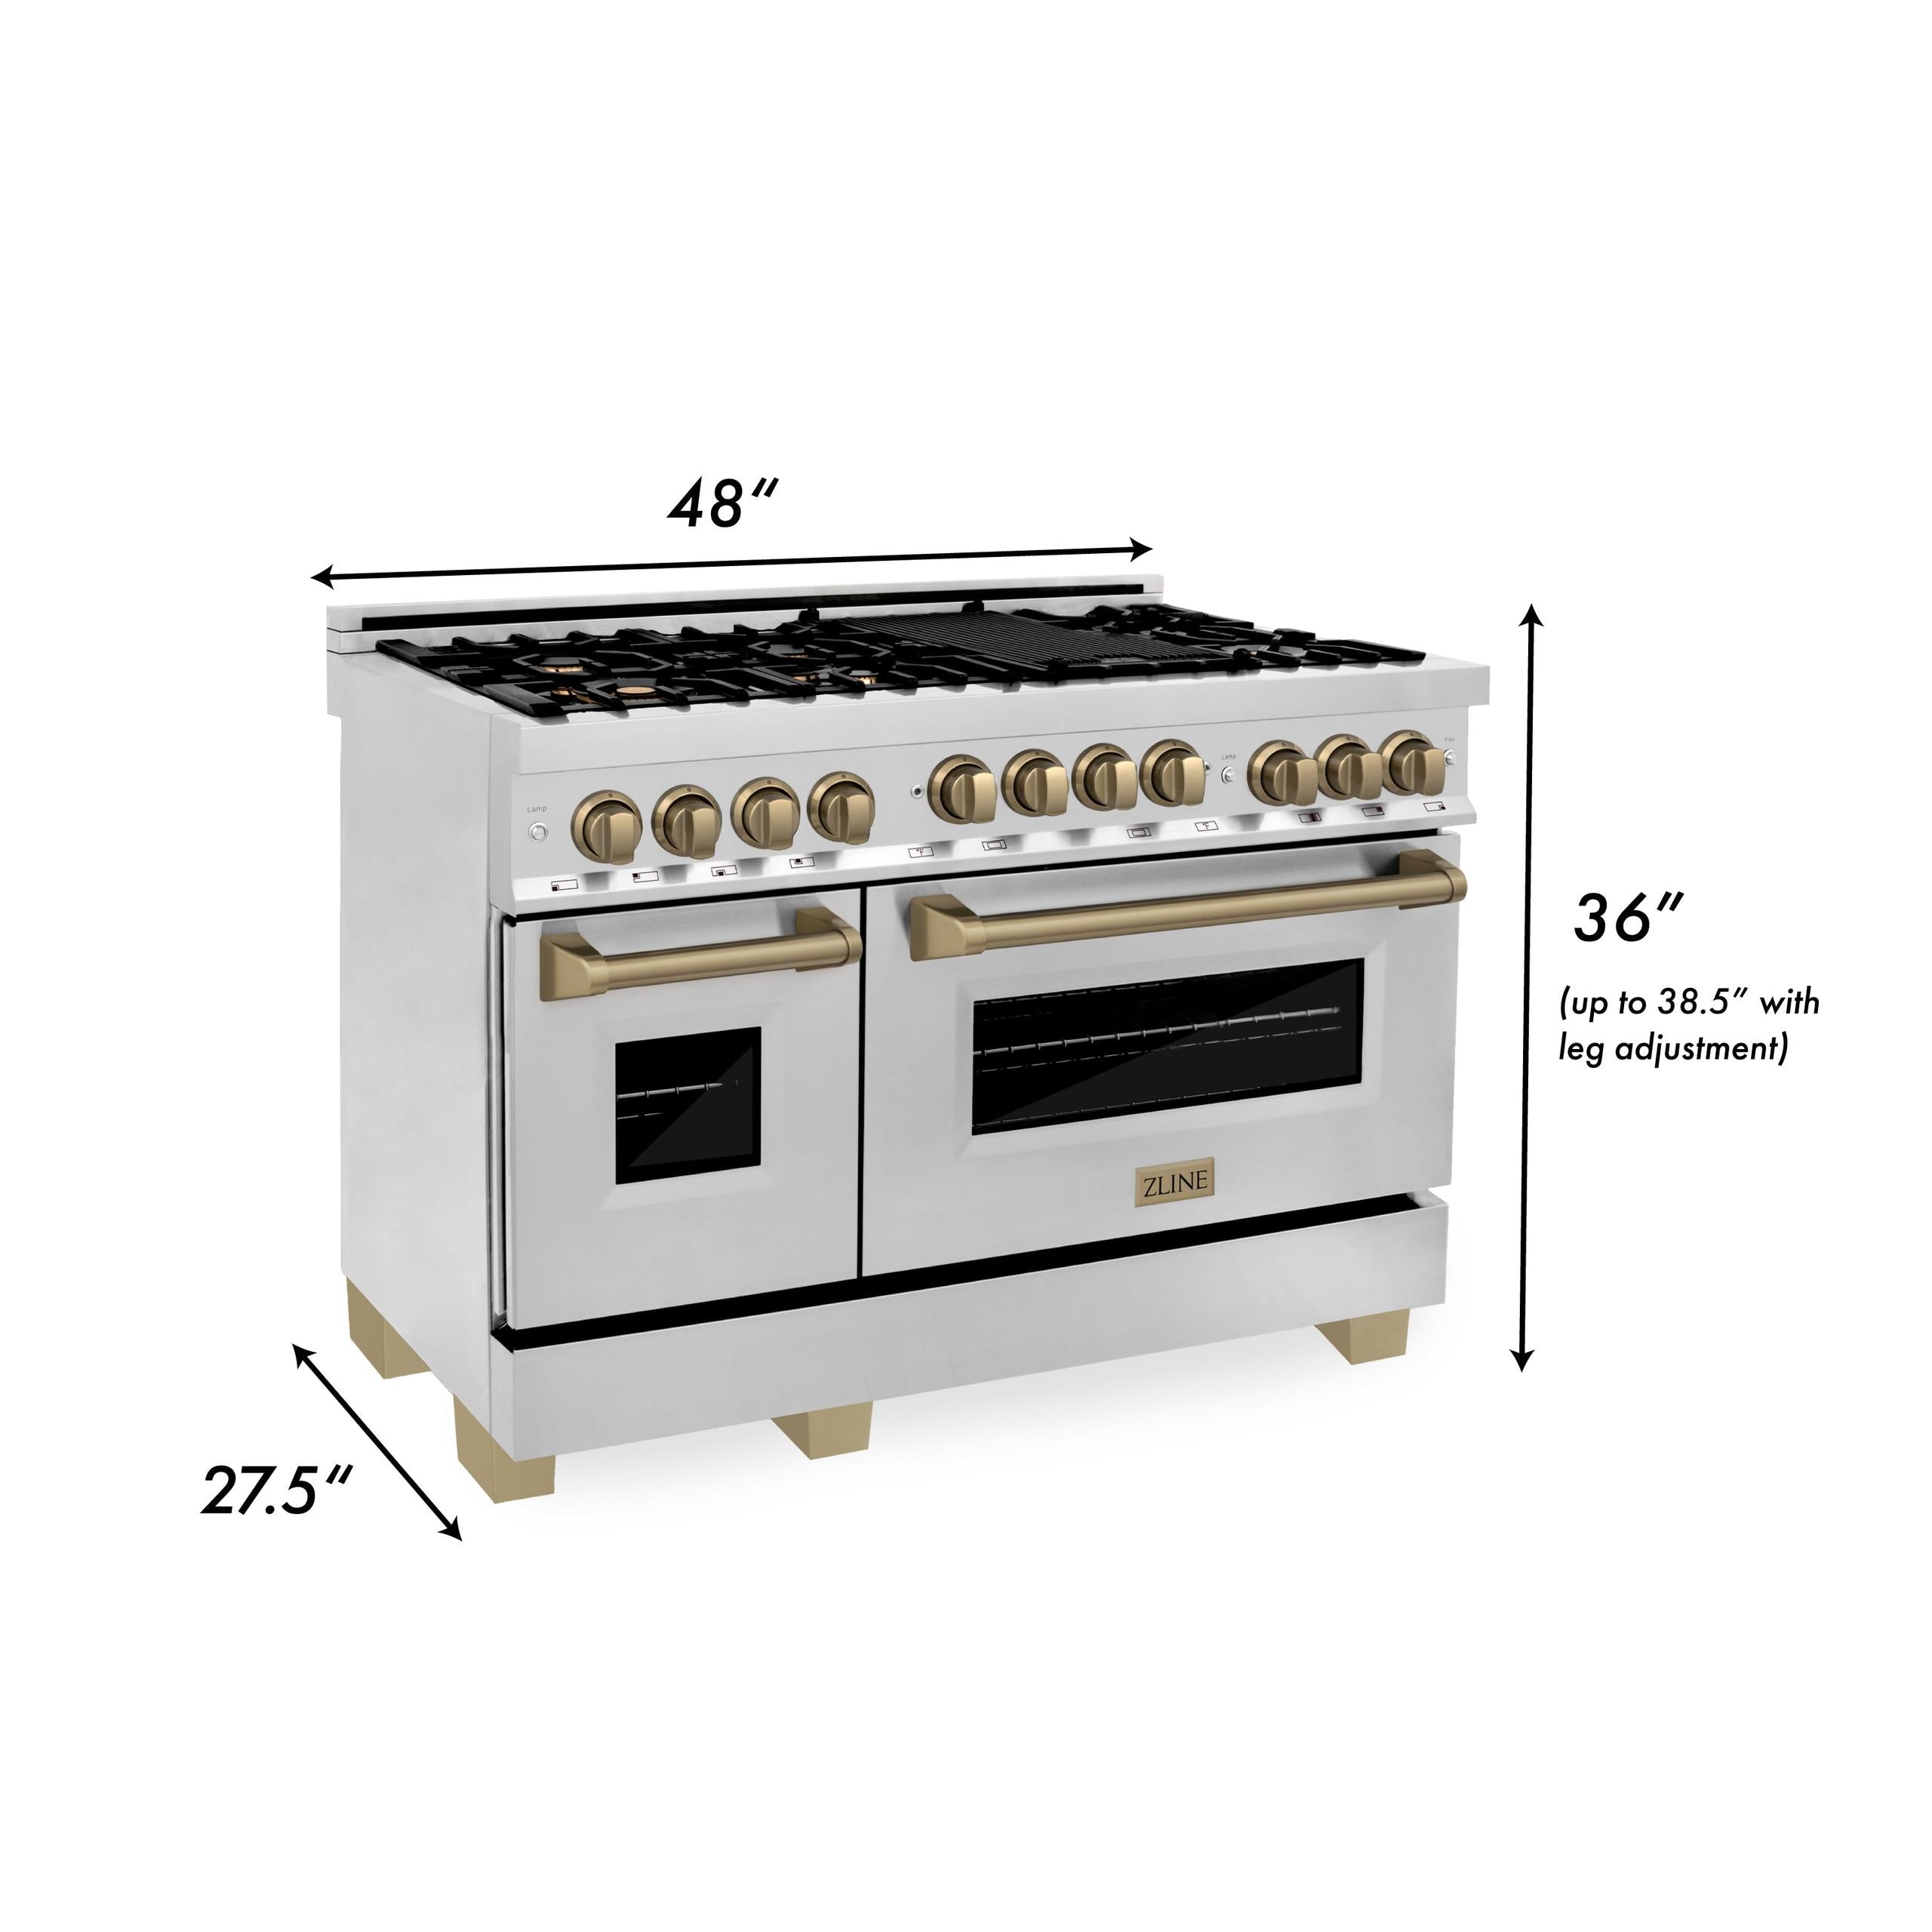 ZLINE KITCHEN AND BATH RGZ48G ZLINE Autograph Edition 48" 6.0 cu. ft. Range with Gas Stove and Gas Oven in Stainless Steel with Accents Color: Gold